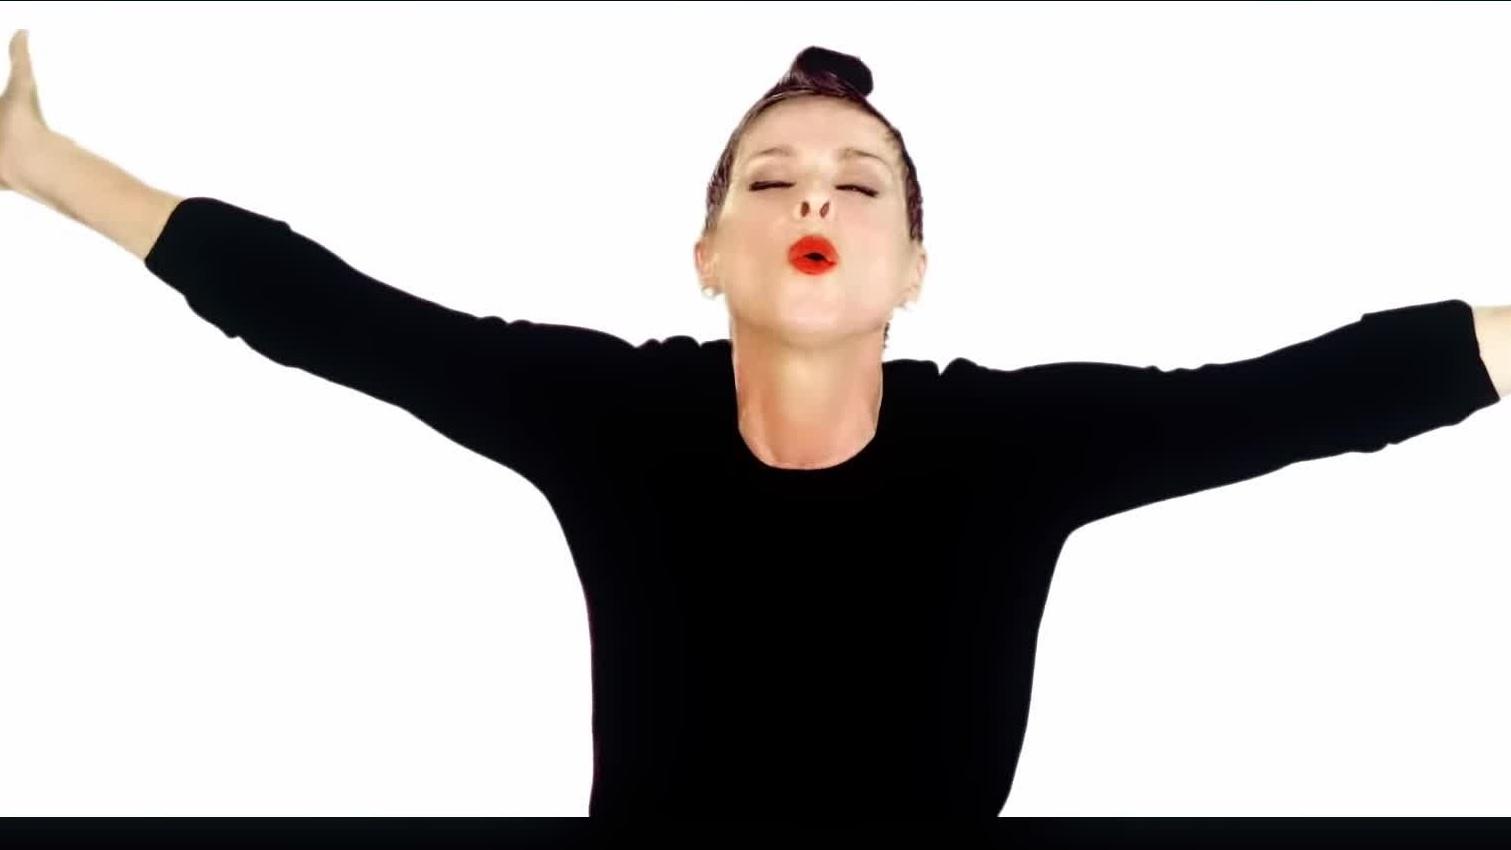 Lisa Stansfield - Never Ever